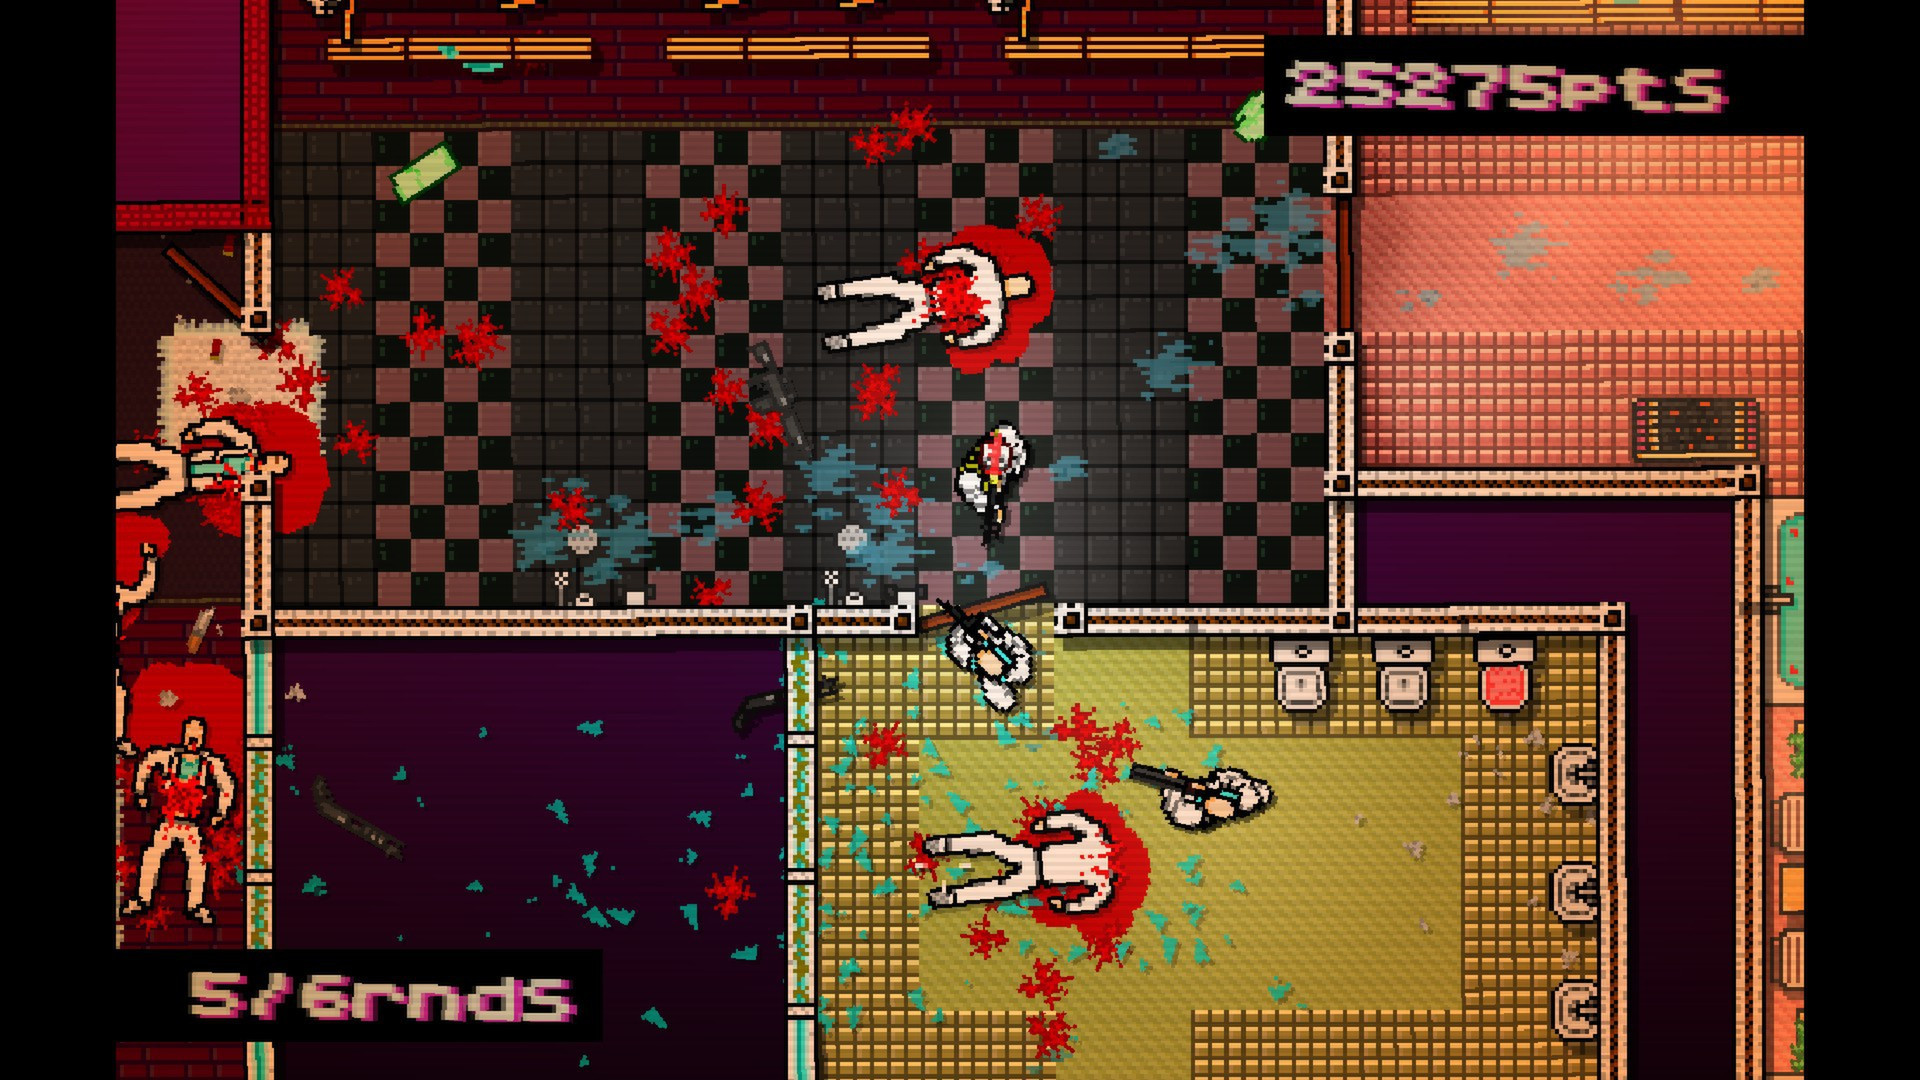 Hotline Miami depicts of a scene of bloody ultra-riolence as characters lie scattered in around a bathroom in a scene meant to discomfit and critique.